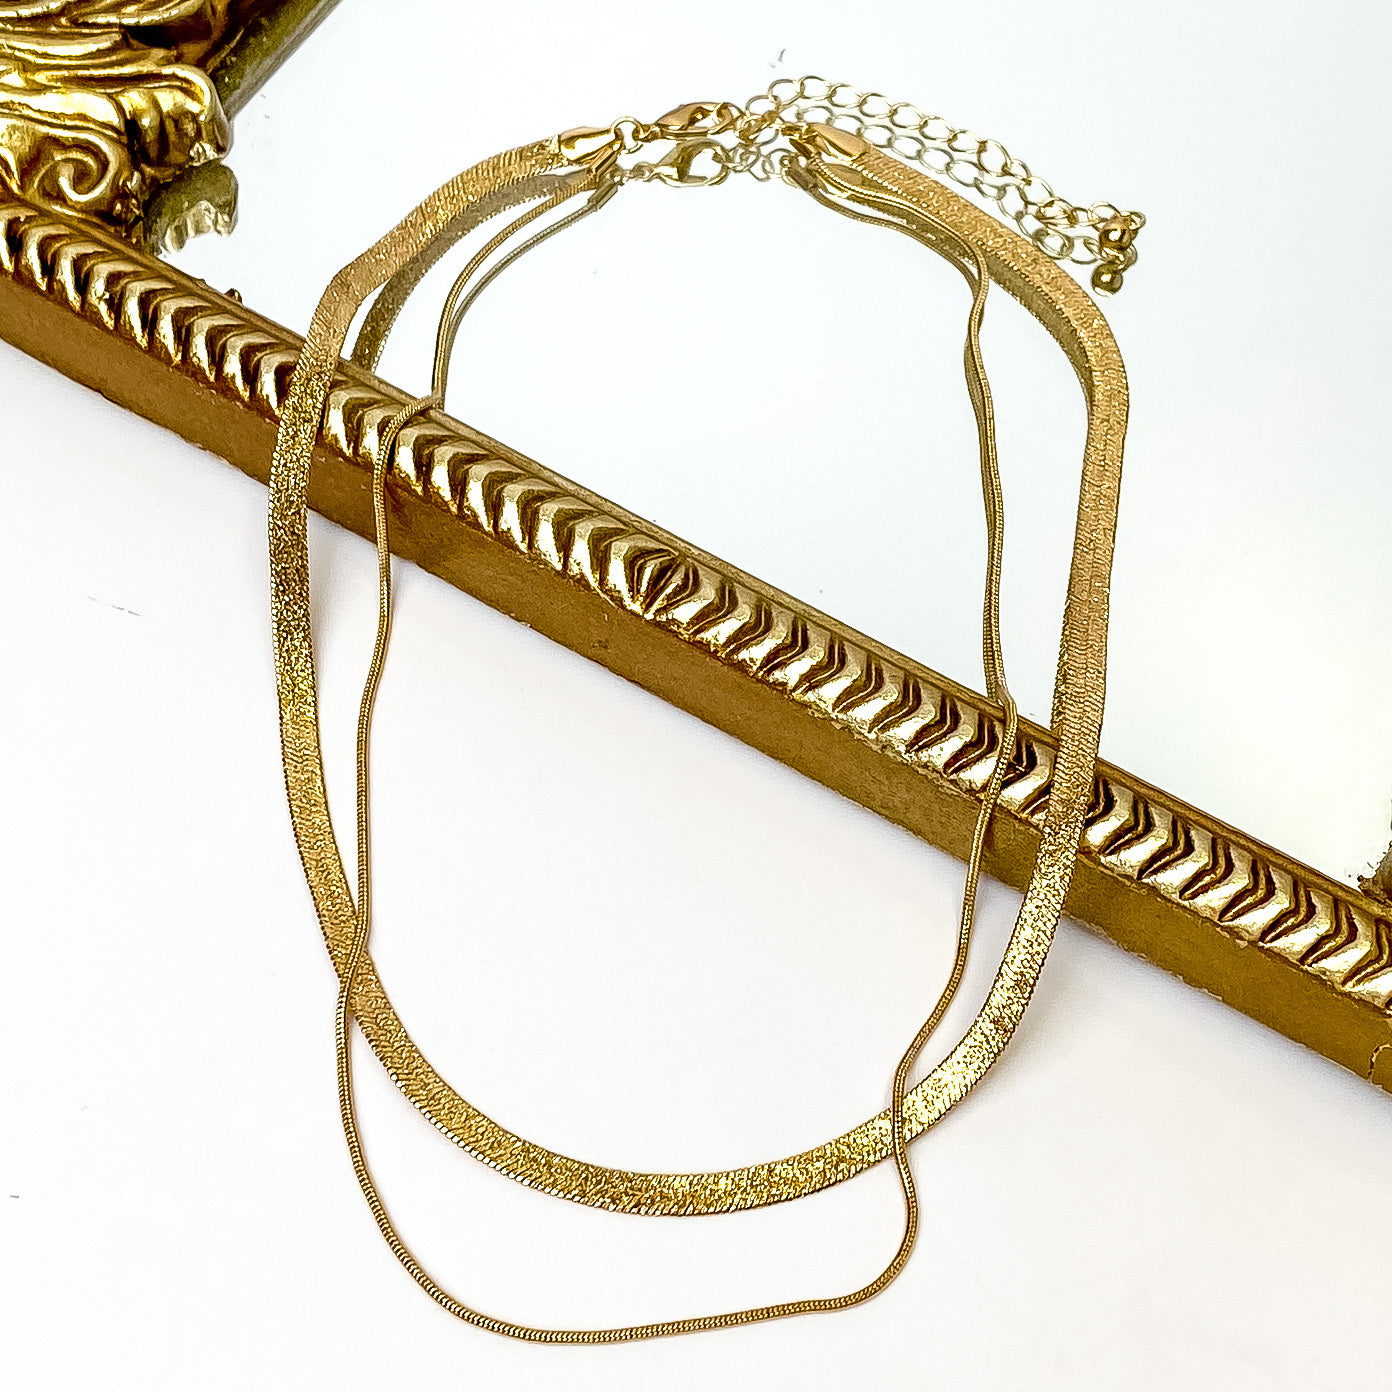 Layered Chain Necklace in Gold Tone - Giddy Up Glamour Boutique